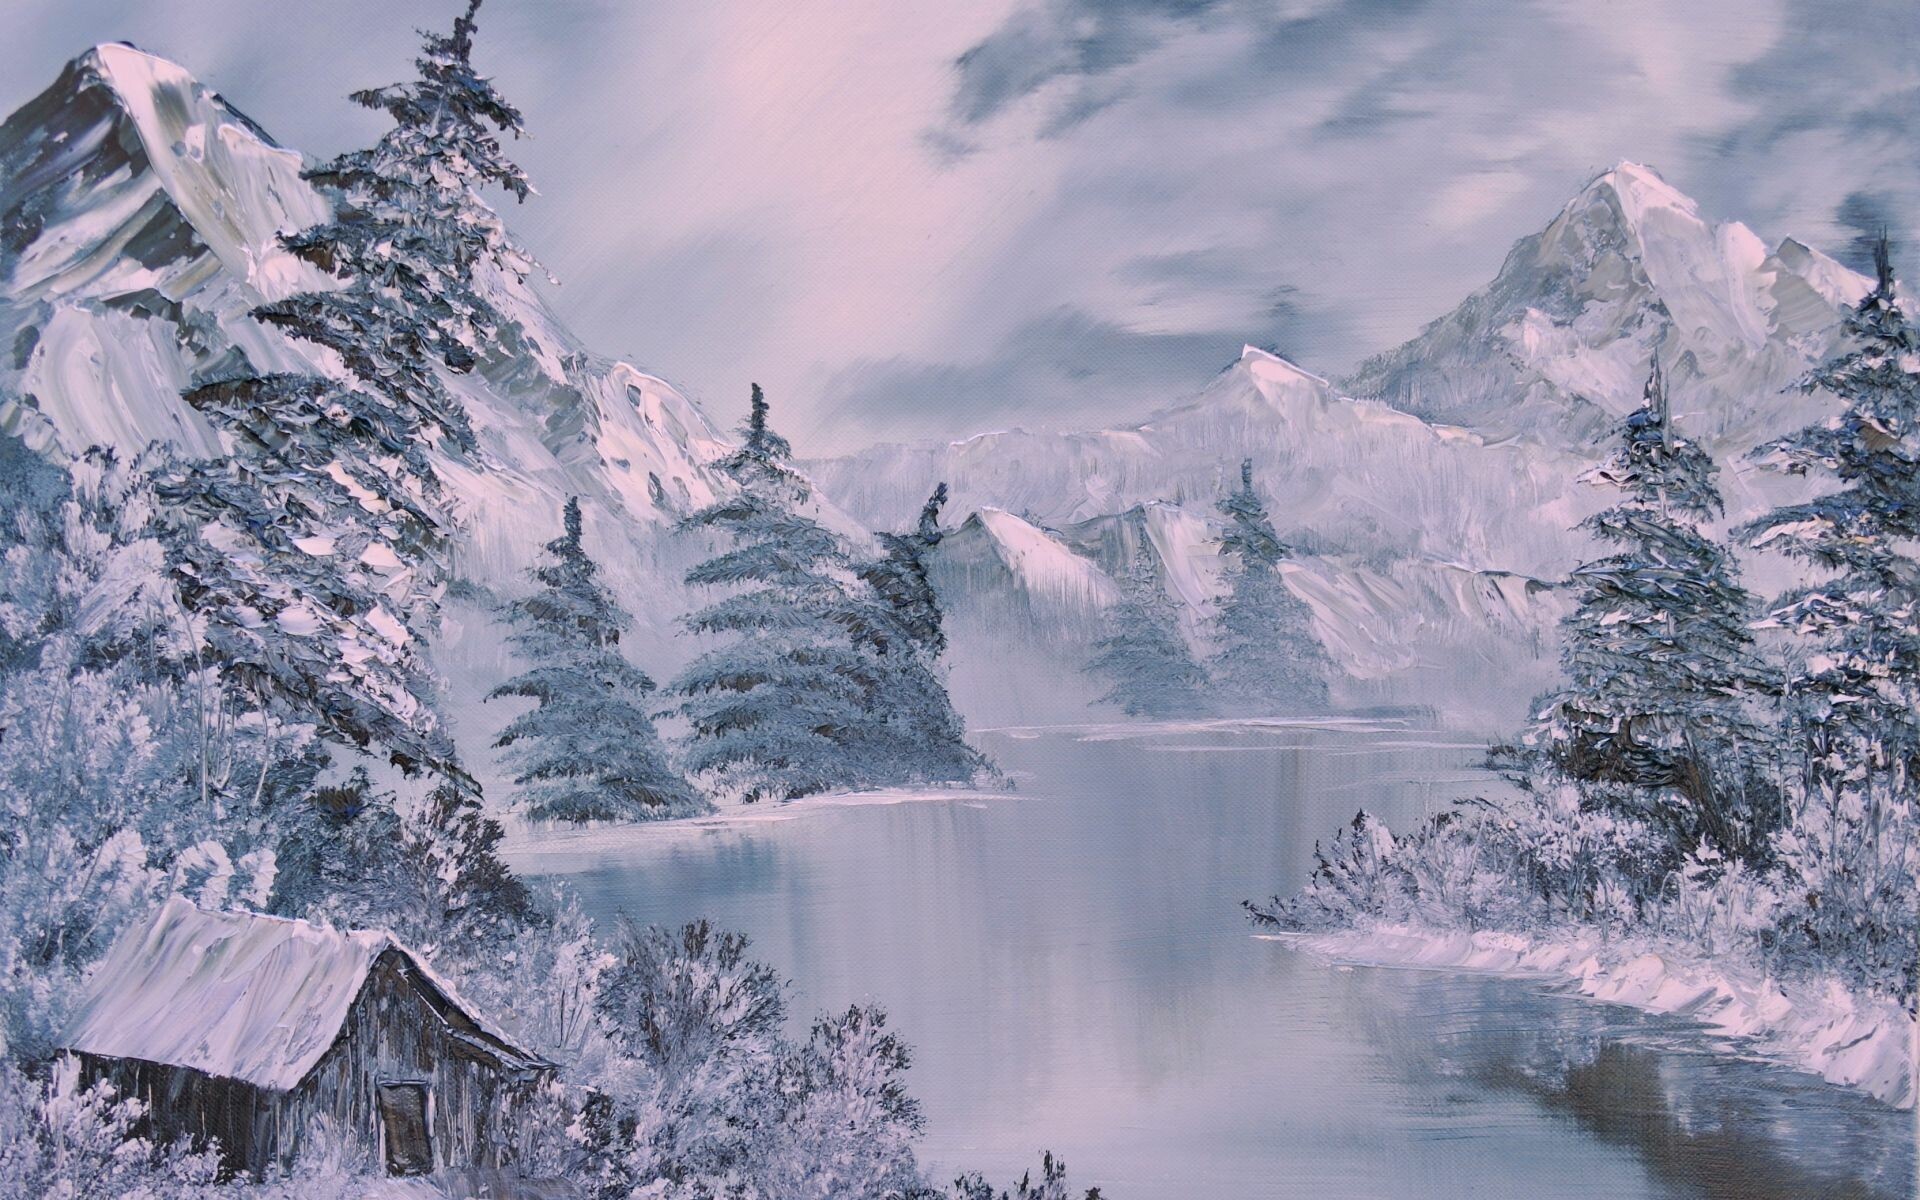 Winter Scenery Wallpaper: HD, 4K, 5K for PC and Mobile. Download free image for iPhone, Android